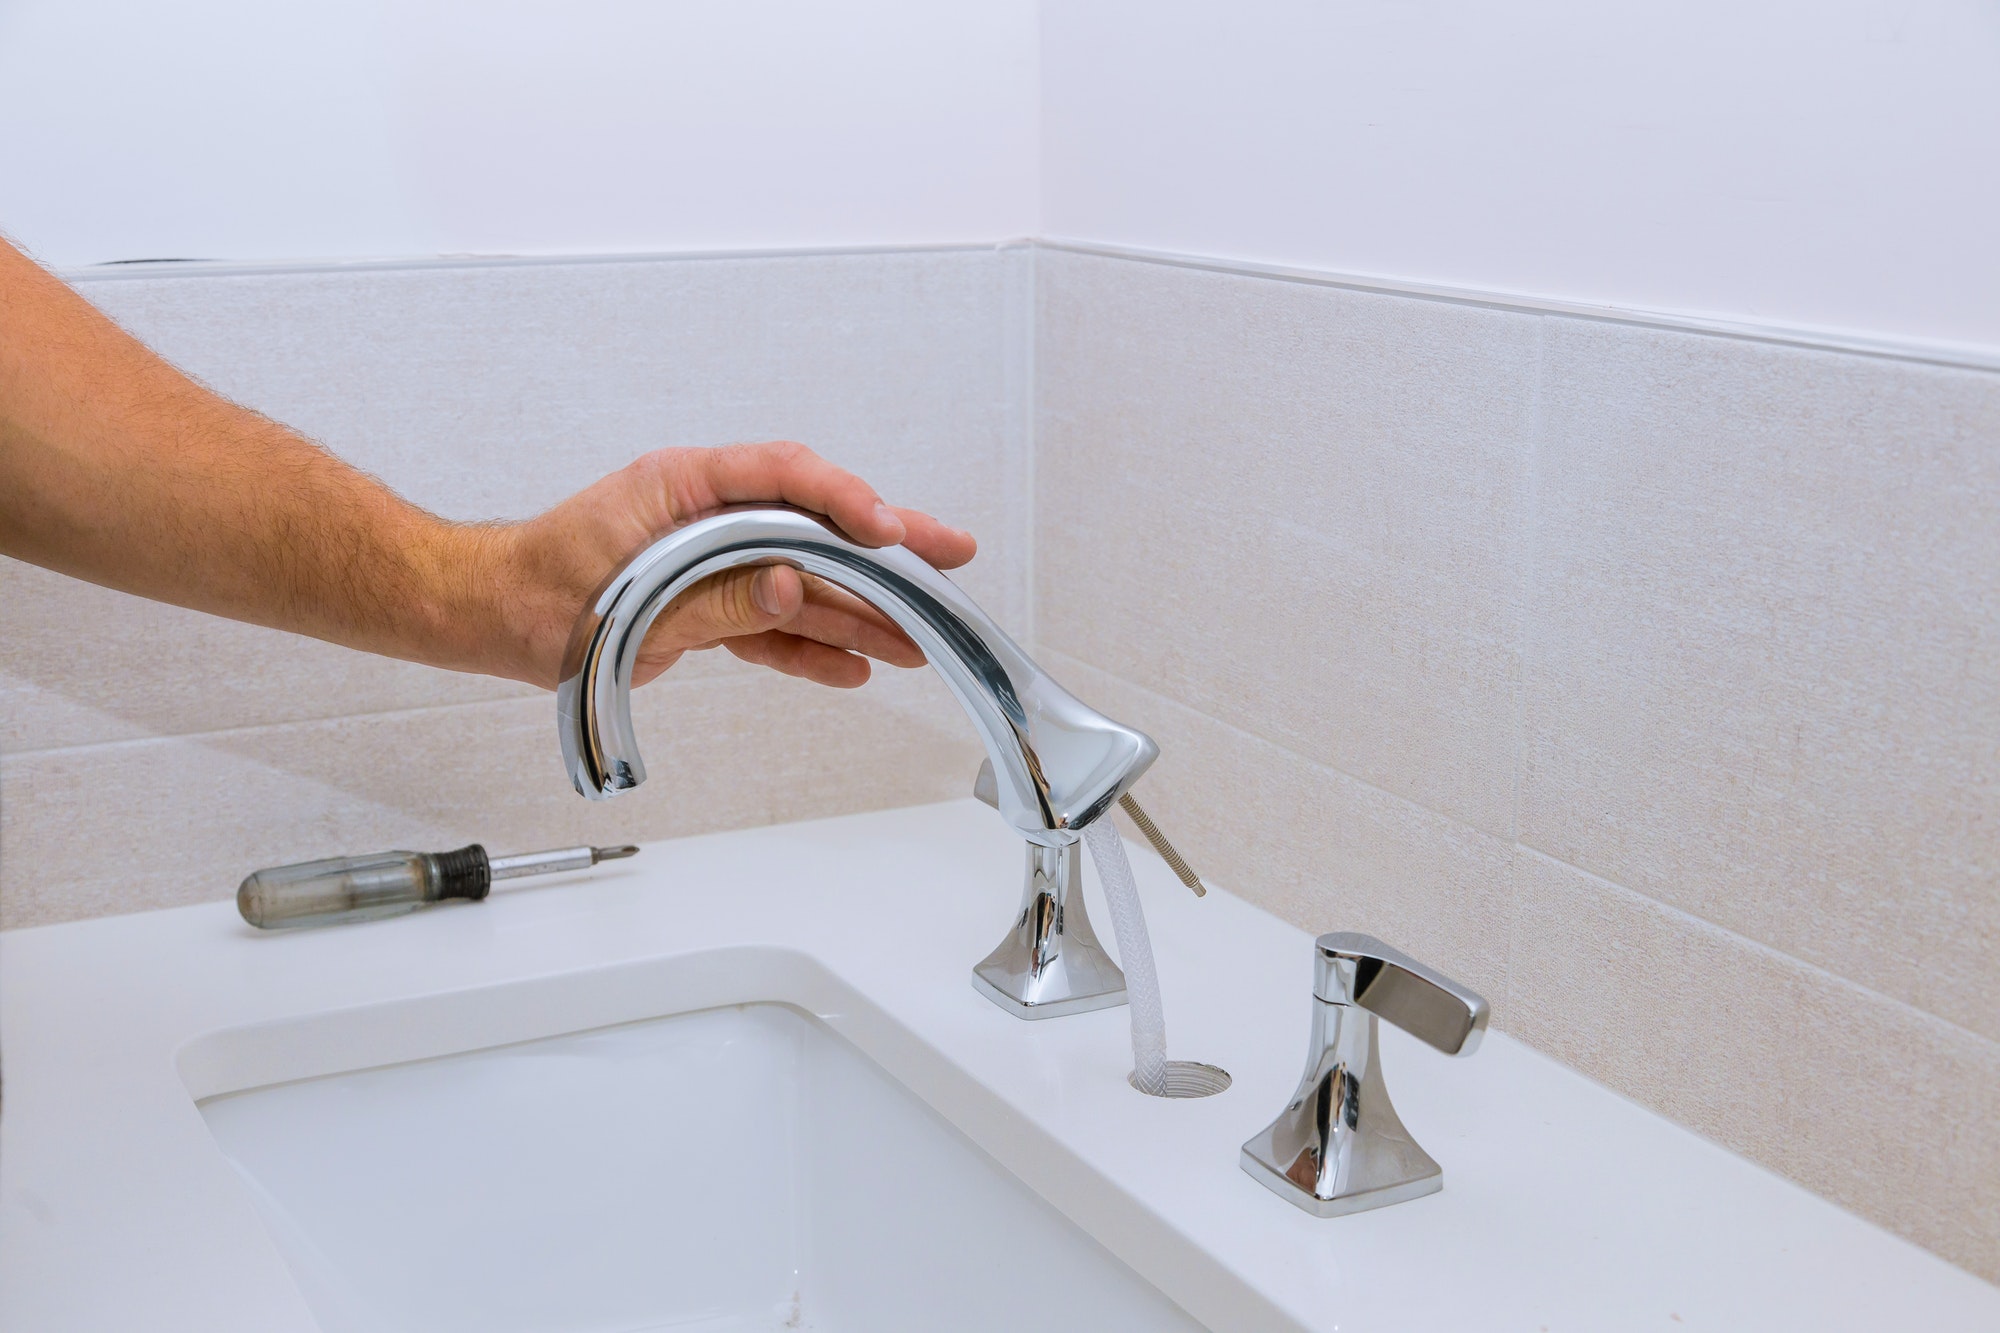 Repair service, assemble and install new faucet lies on the ceramic sink